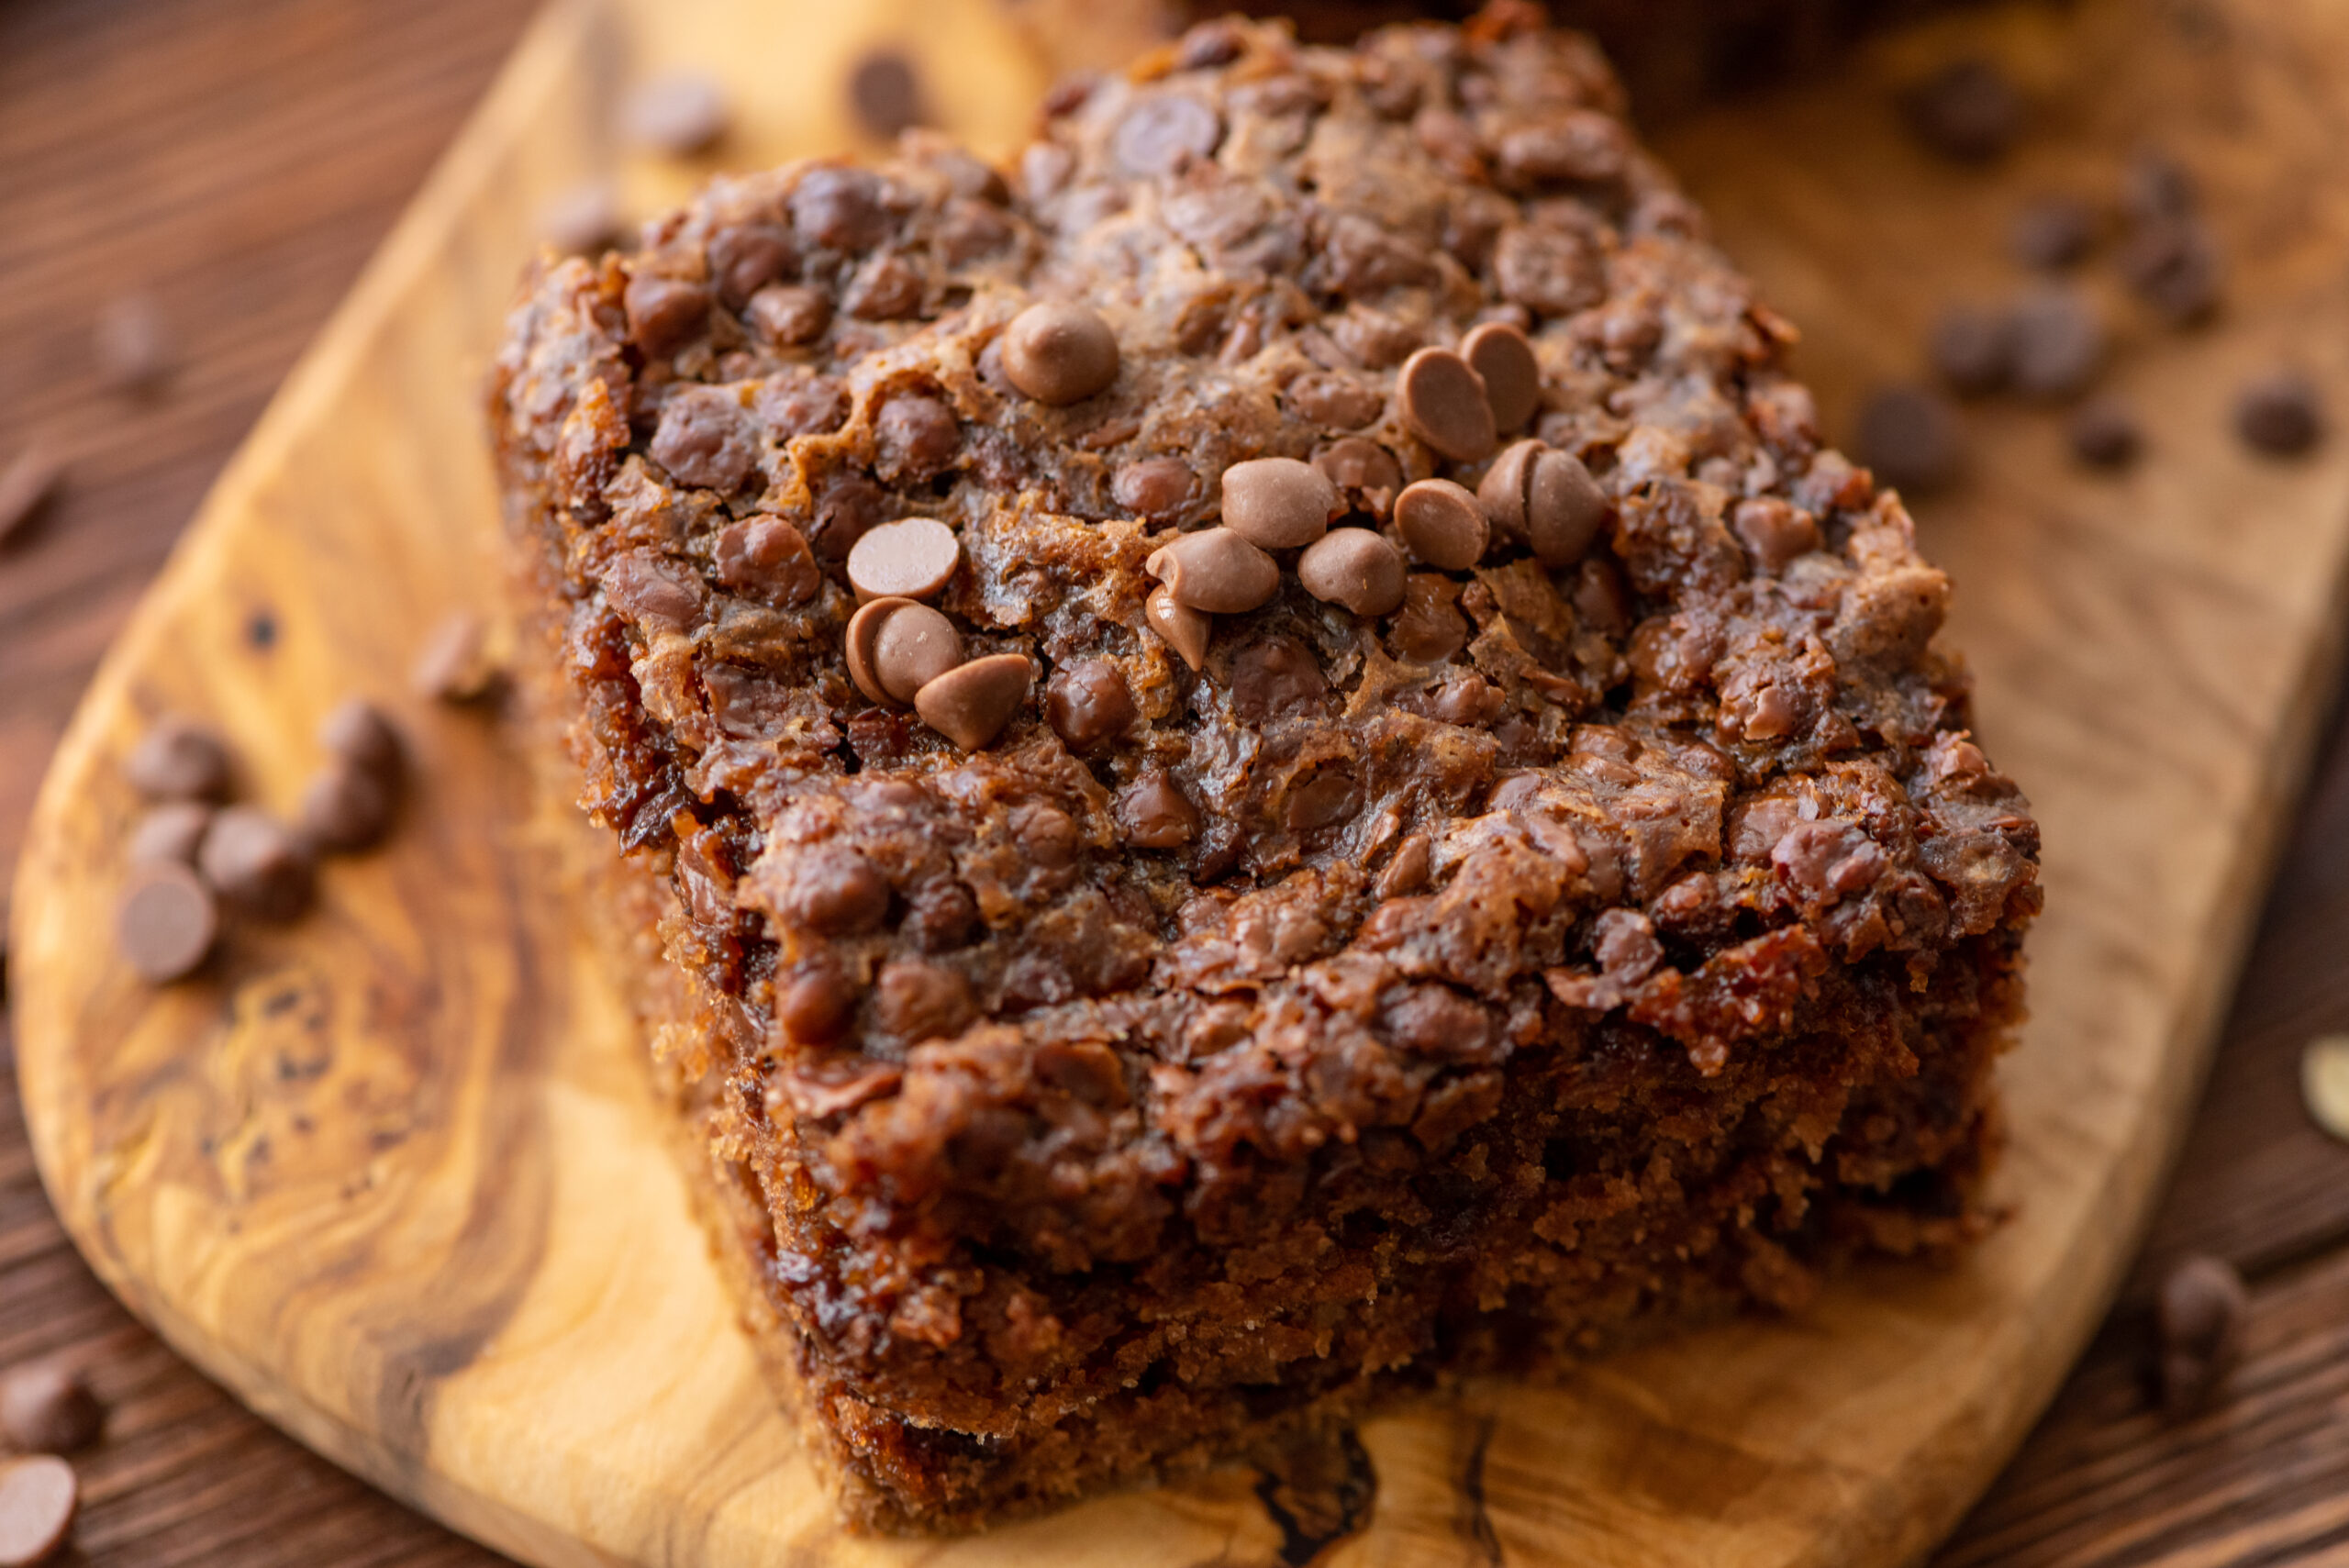 a piece of chocolate oatmeal cake on a wooden board ready to enjoy.